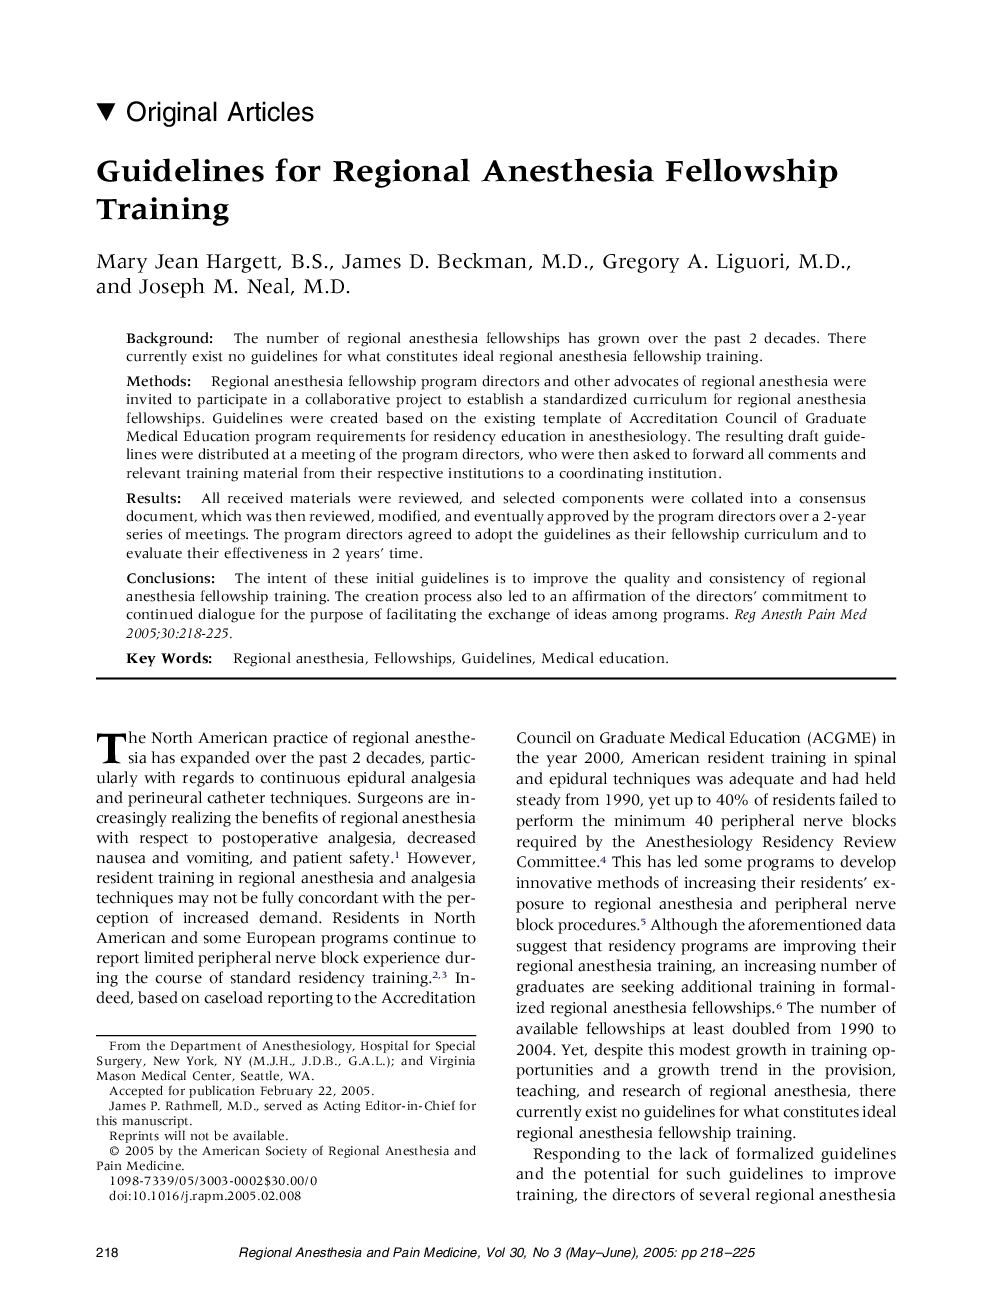 Guidelines for Regional Anesthesia Fellowship Training